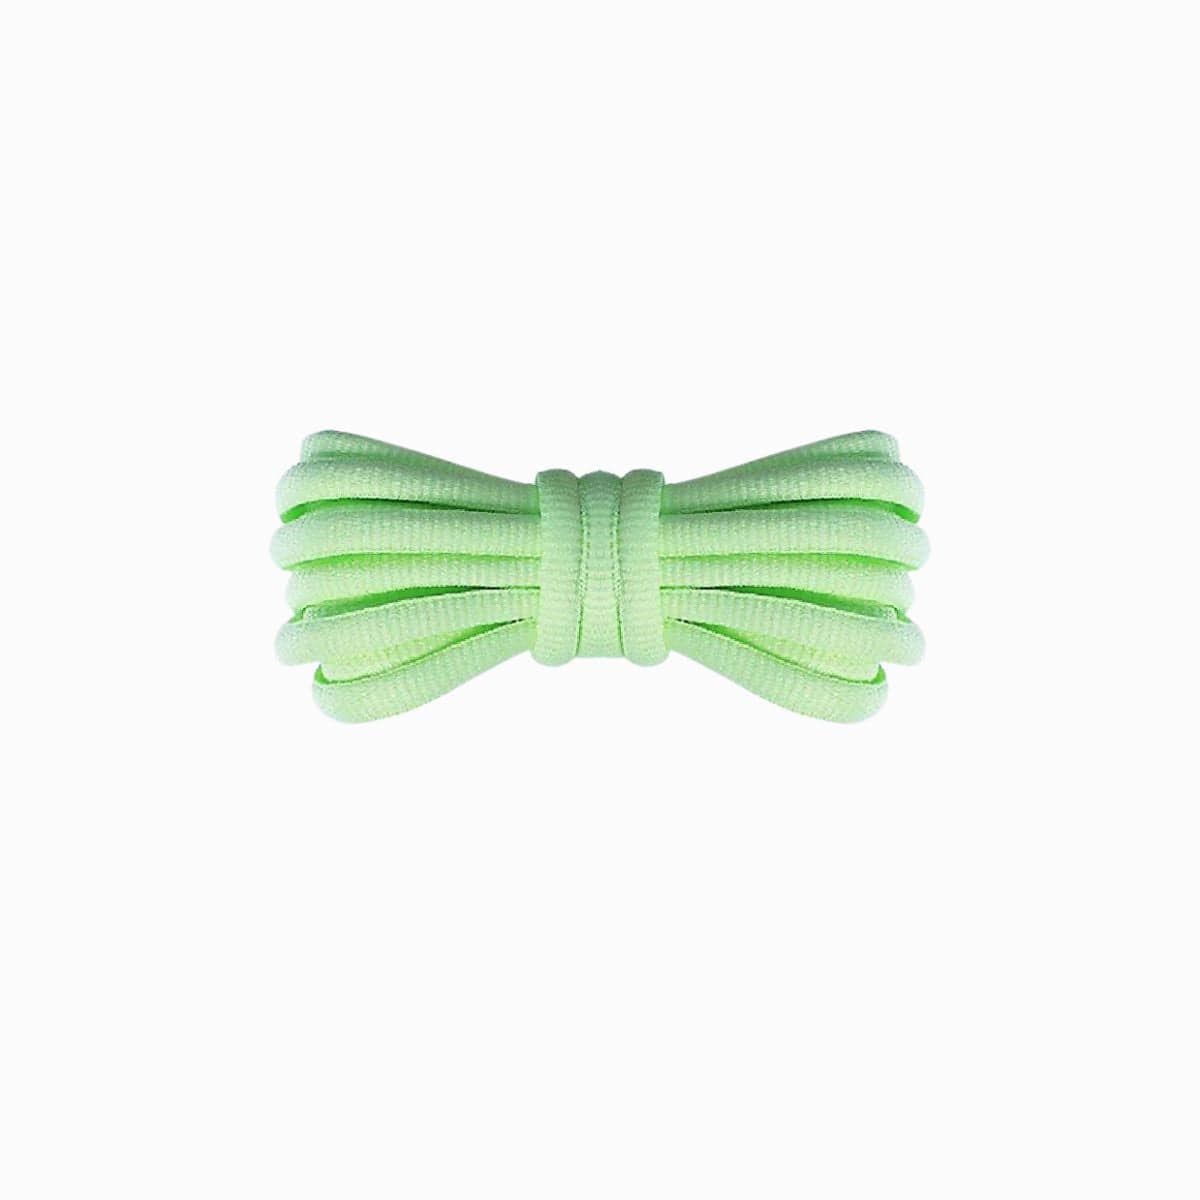 Nike_TN_Replacement_Shoelaces_Light_Green